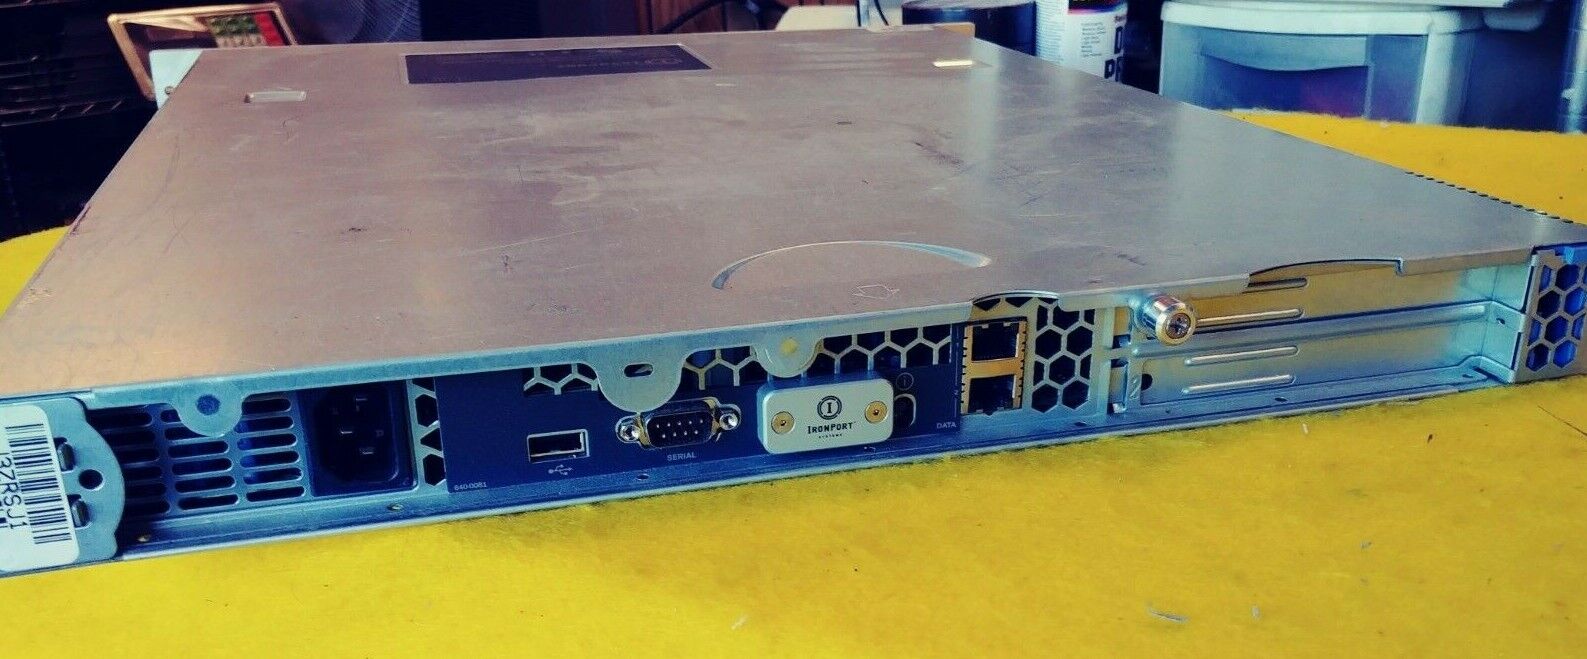 Cisco IronPort C160 Email Security Gateway Appliance #20814 for 